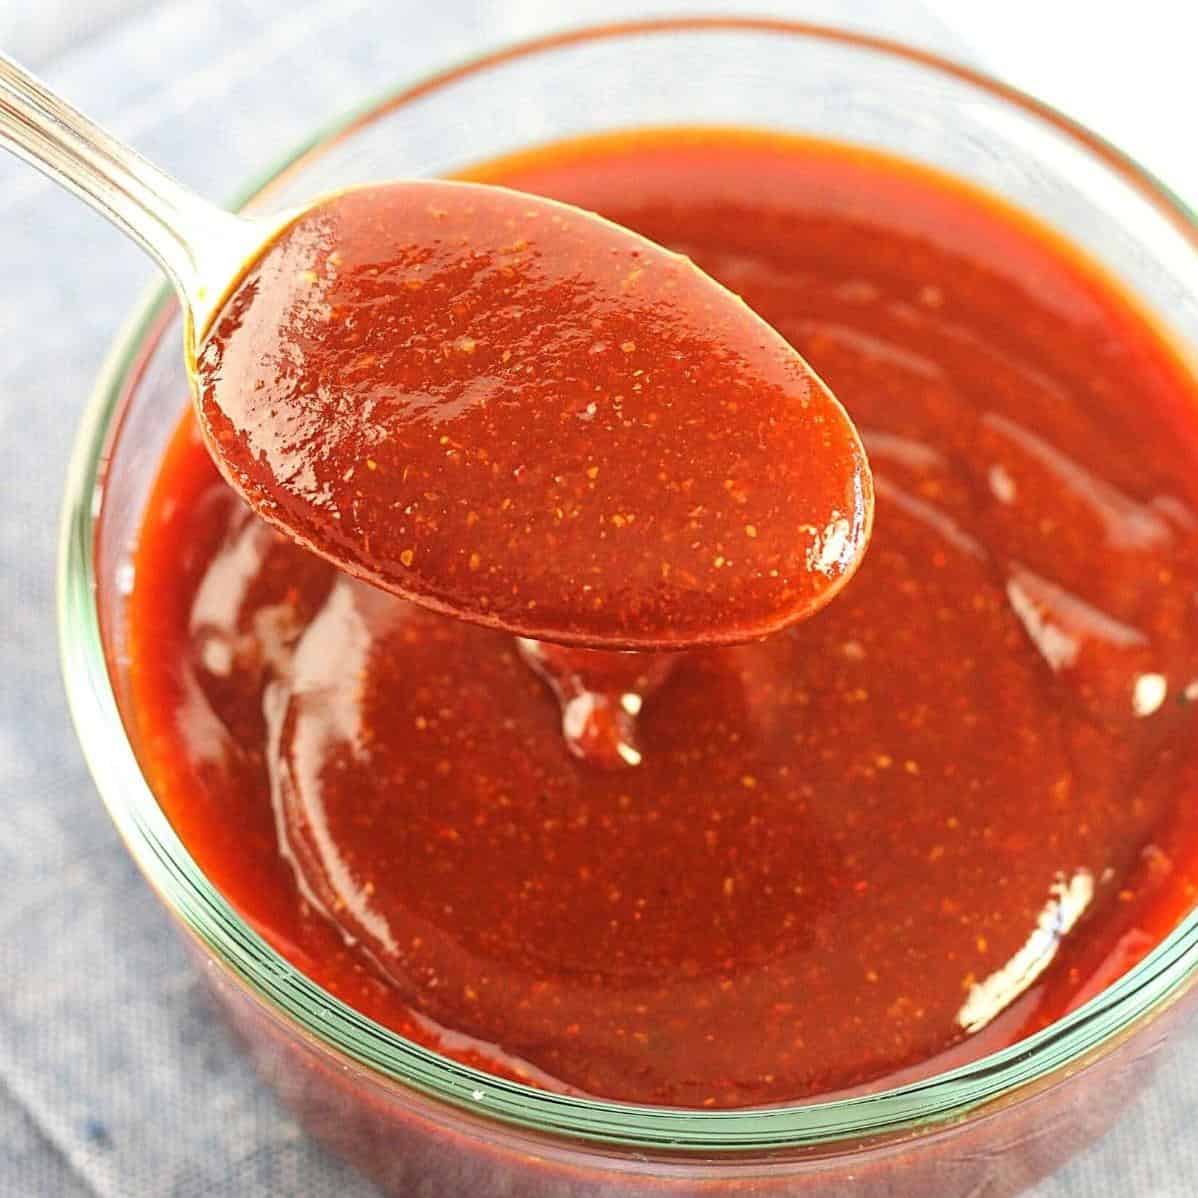  The tangy and savory flavors of this BBQ sauce will make you want to lick your fingers.